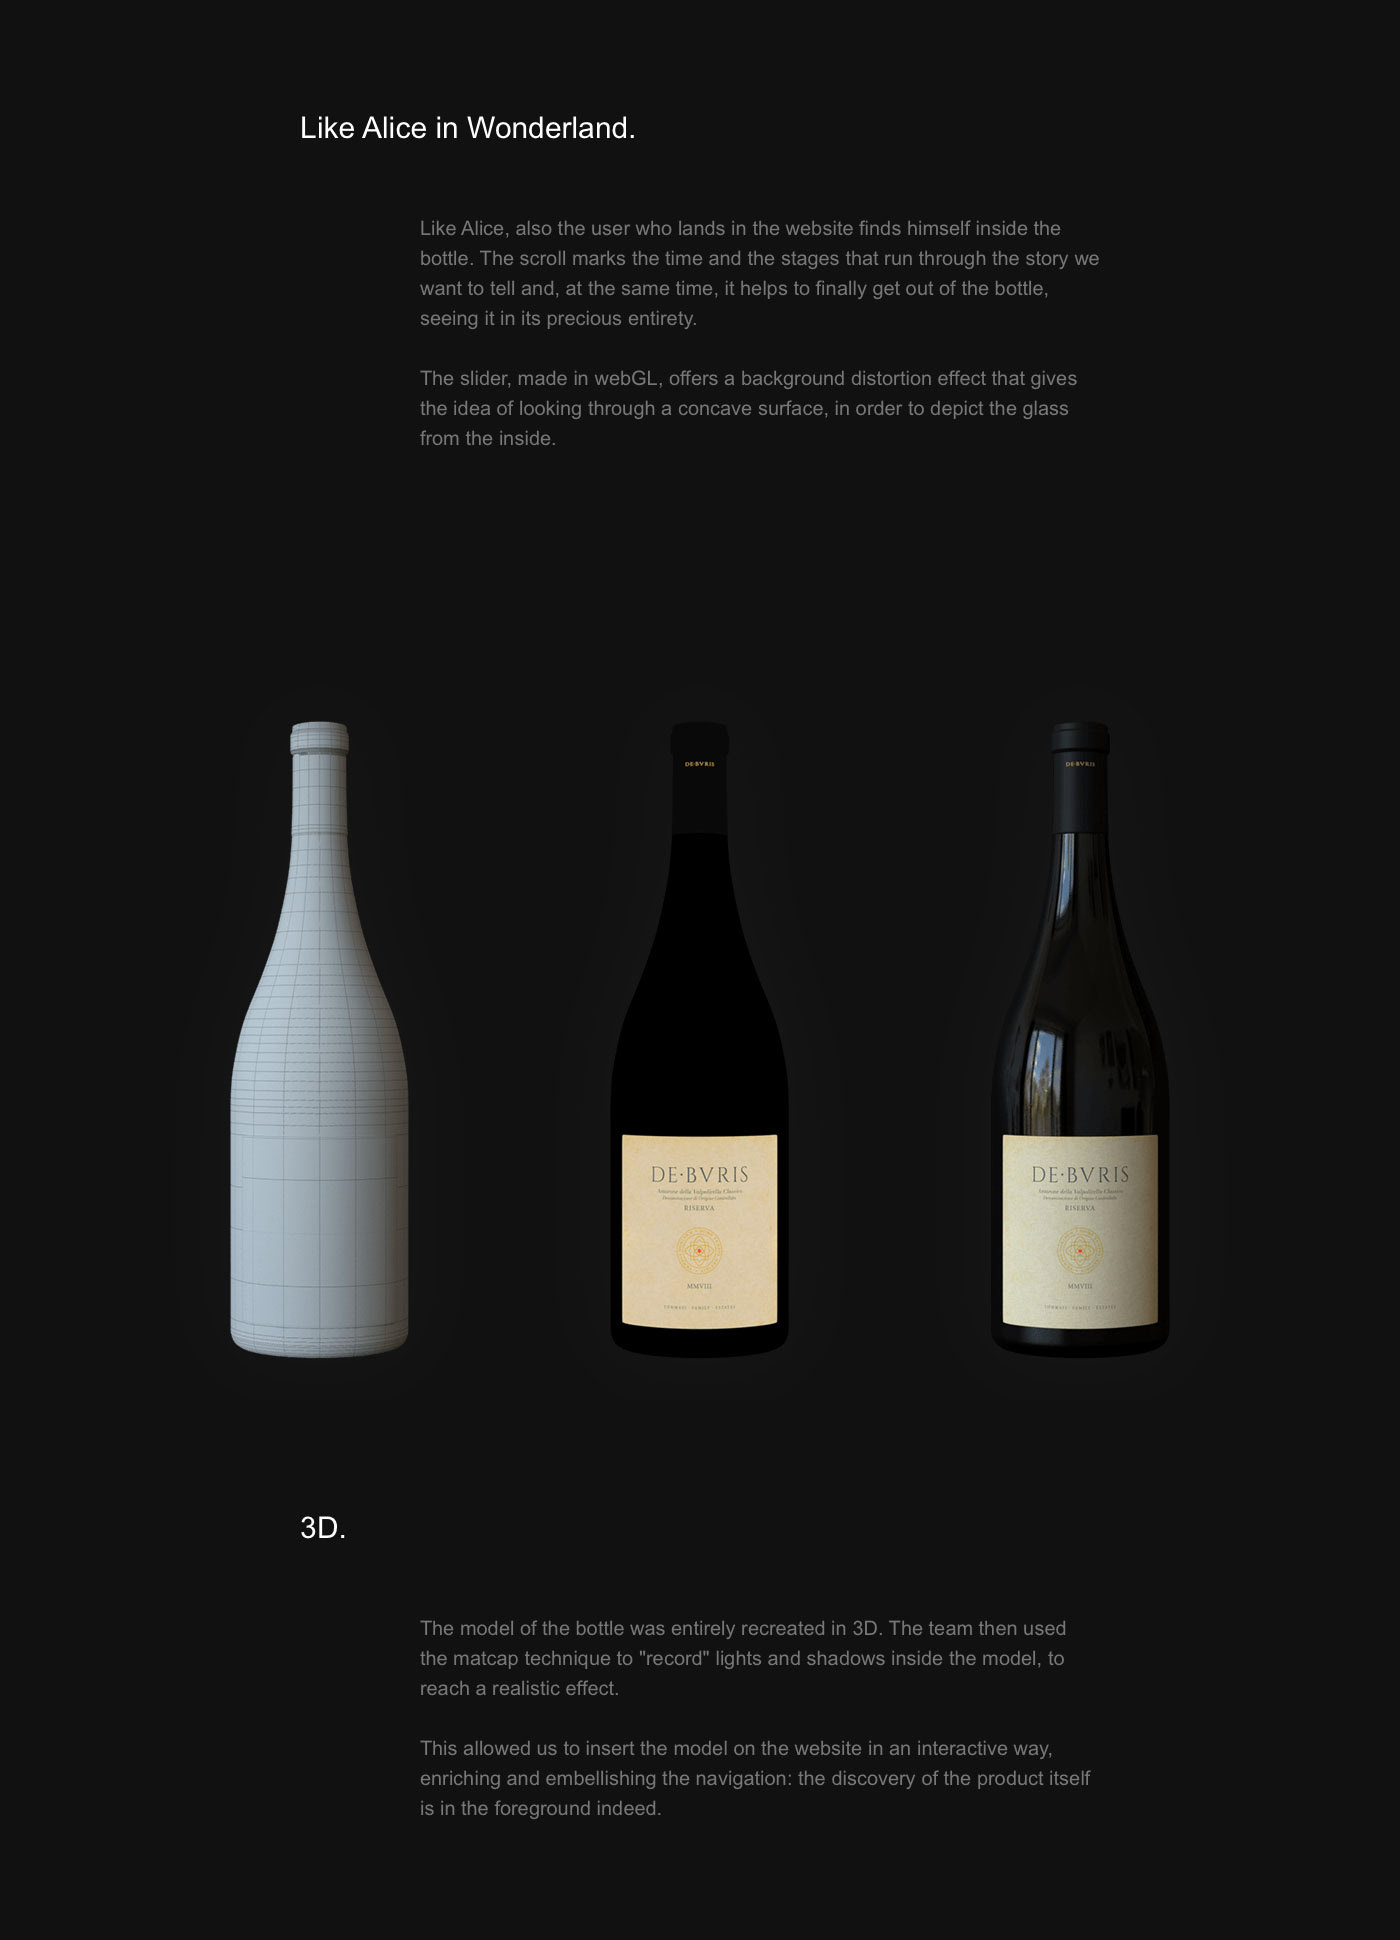 3D wine glsl three.js webgl video one page site food & drink interaction